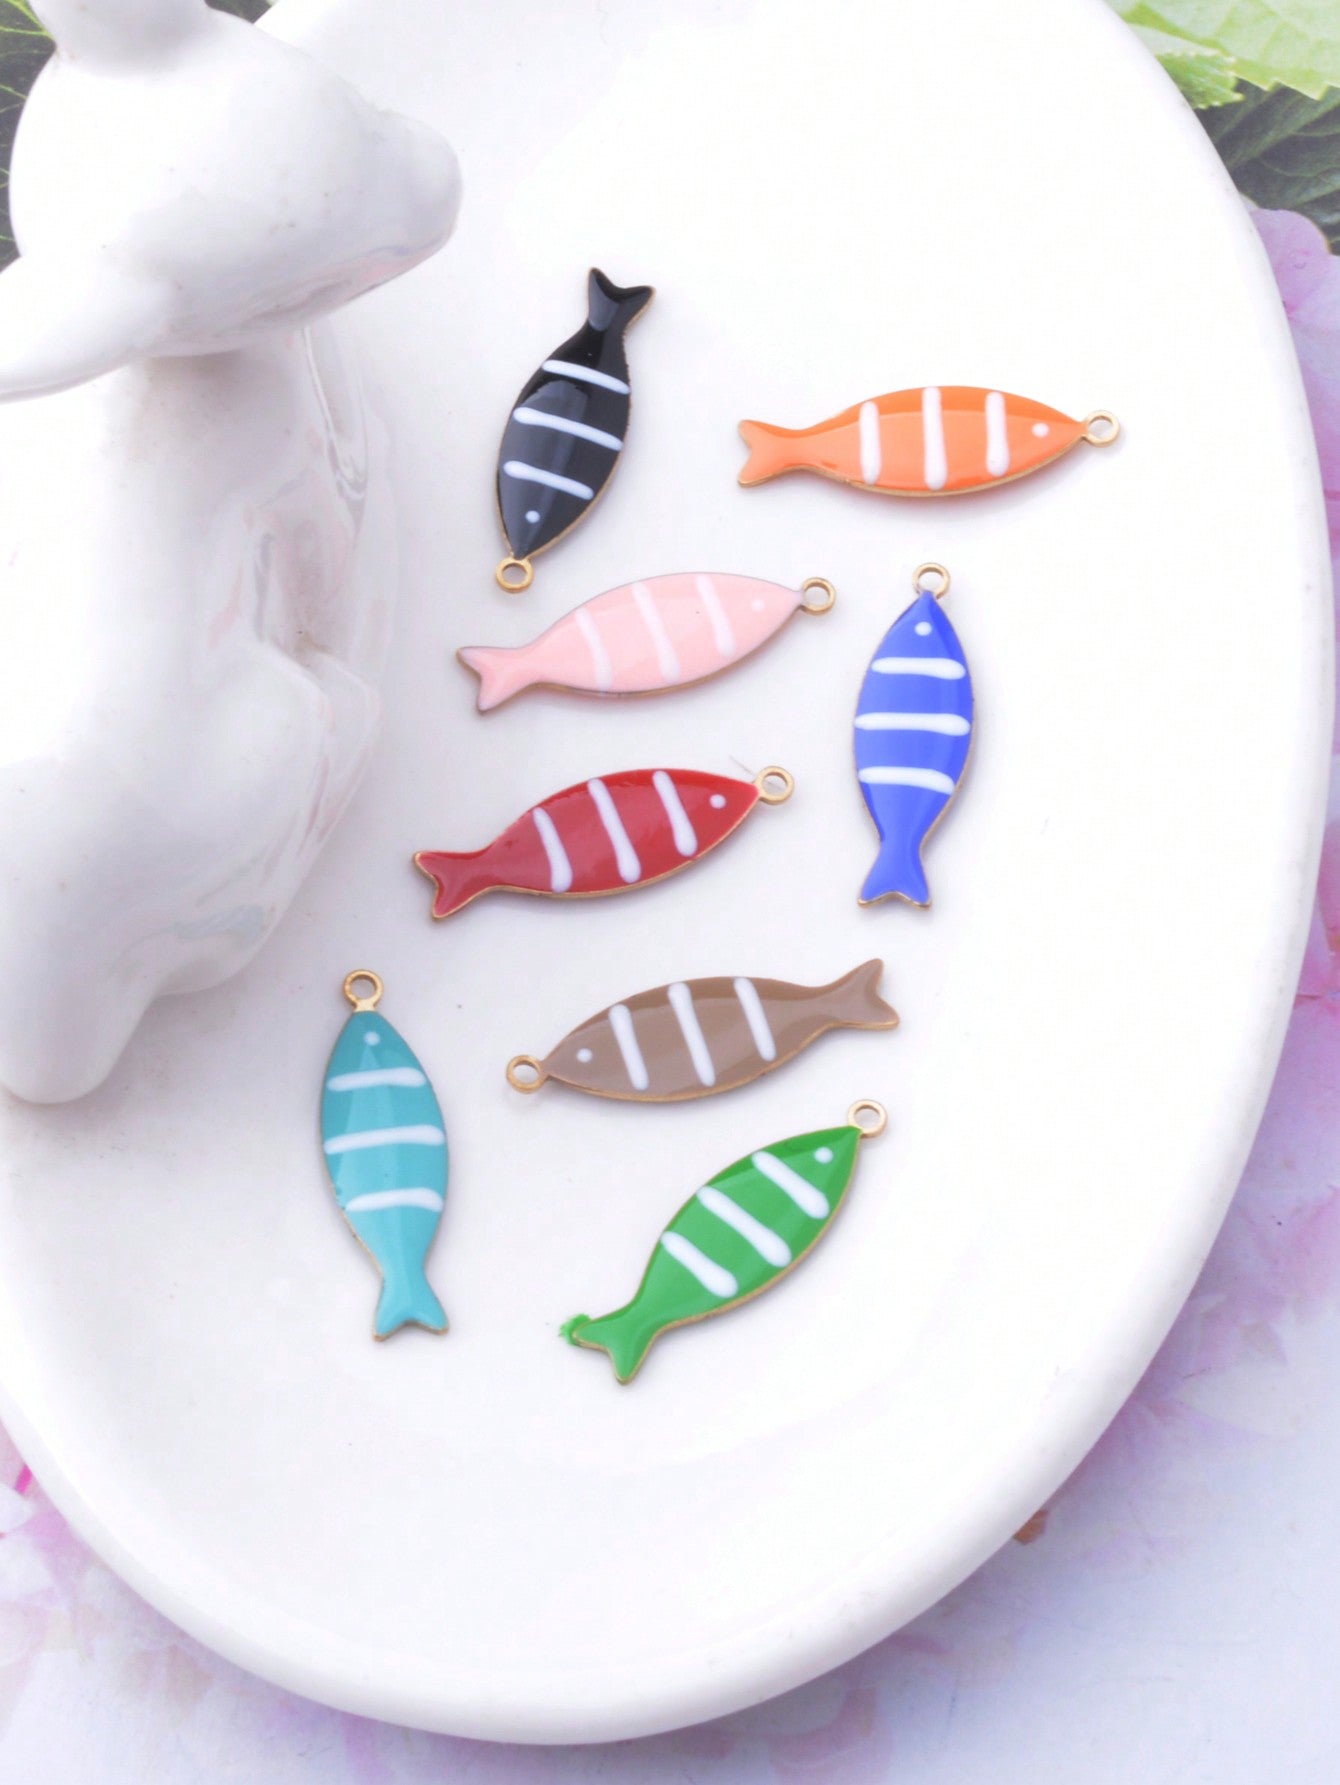 4pcs Double-sided Copper Colorful Fish Shaped Diy Jewelry Pendant For Earrings Or Necklace Making